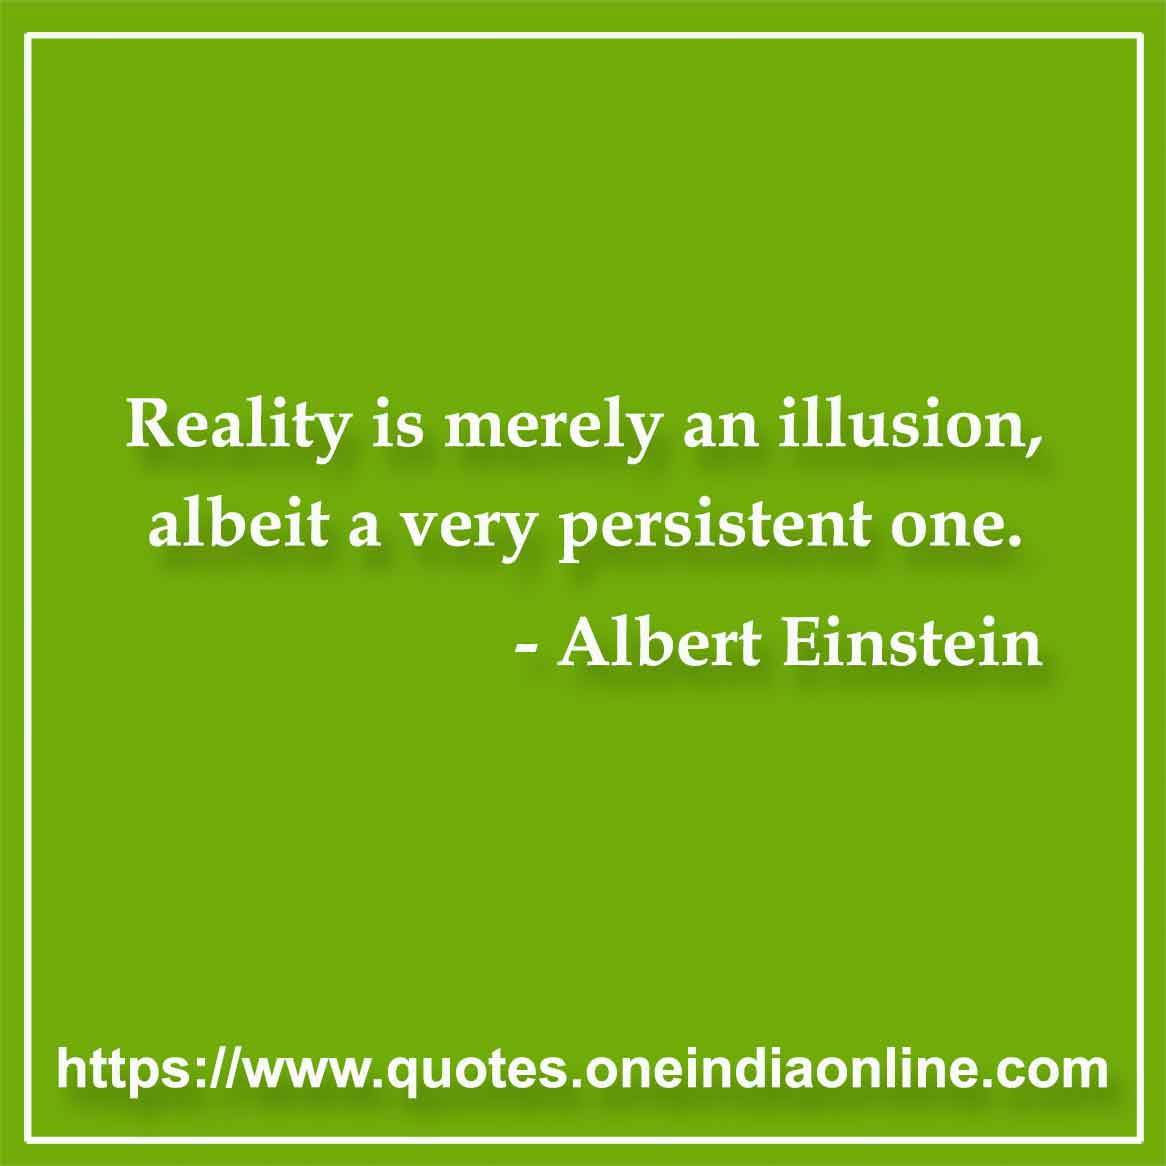 Reality is merely an illusion, albeit a very persistent one.

- Reality Quotes by Albert Einstein